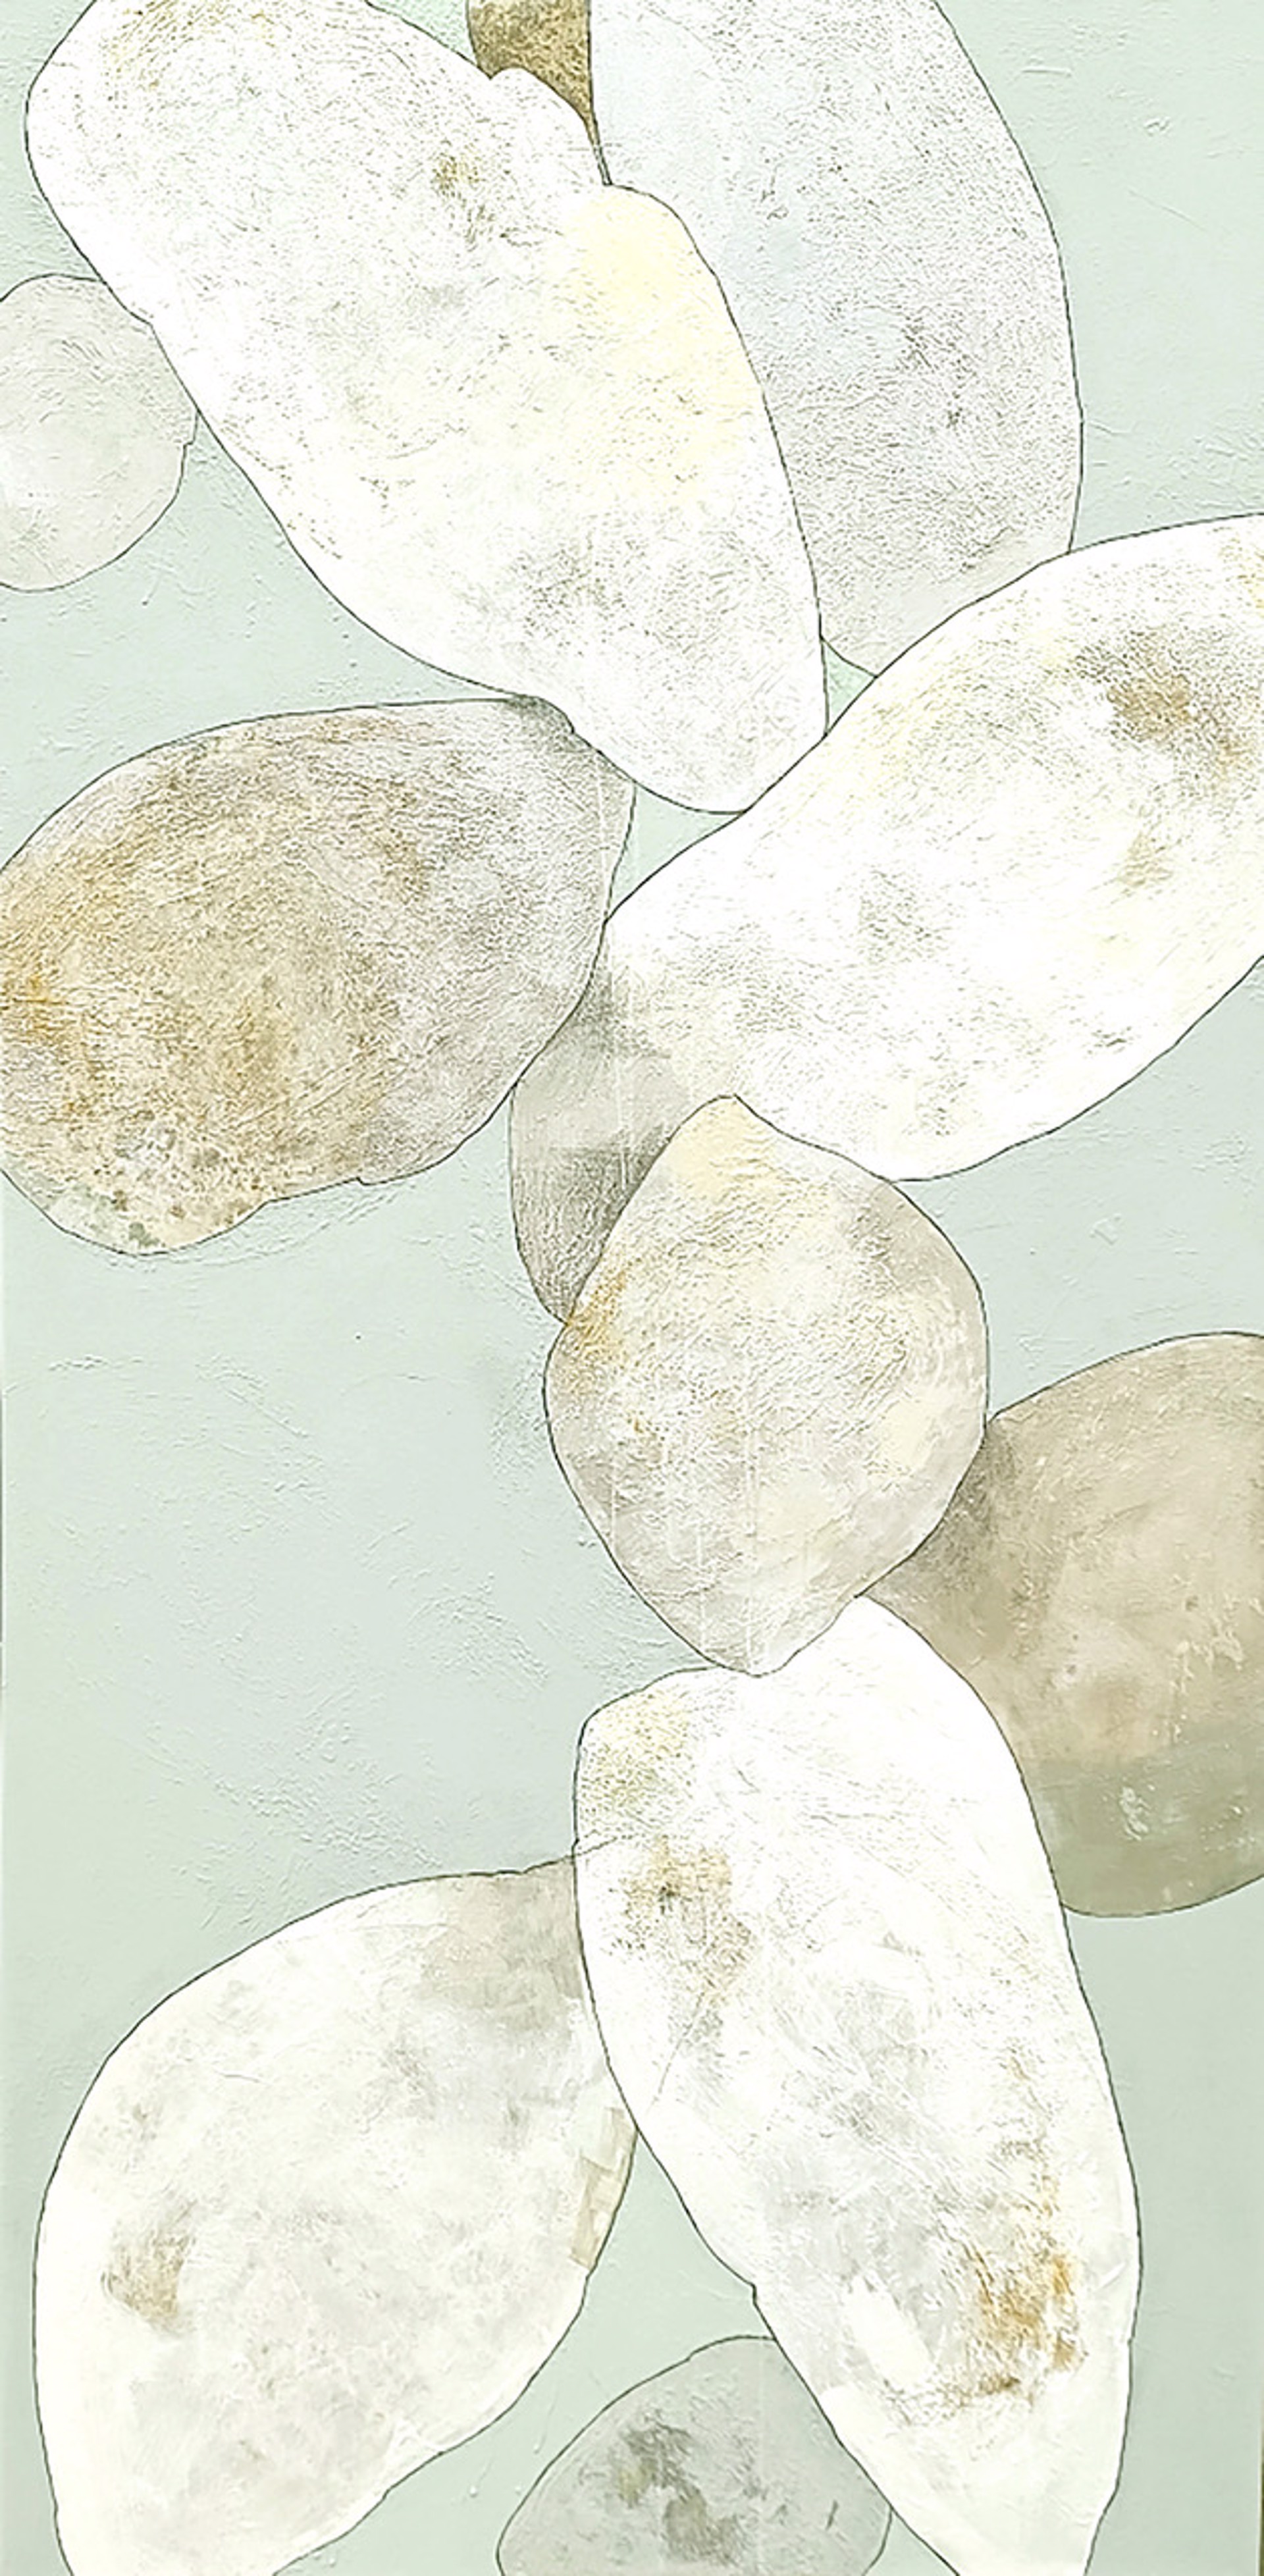 Fragments (Coral and Sea Glass) by Meredith Pardue